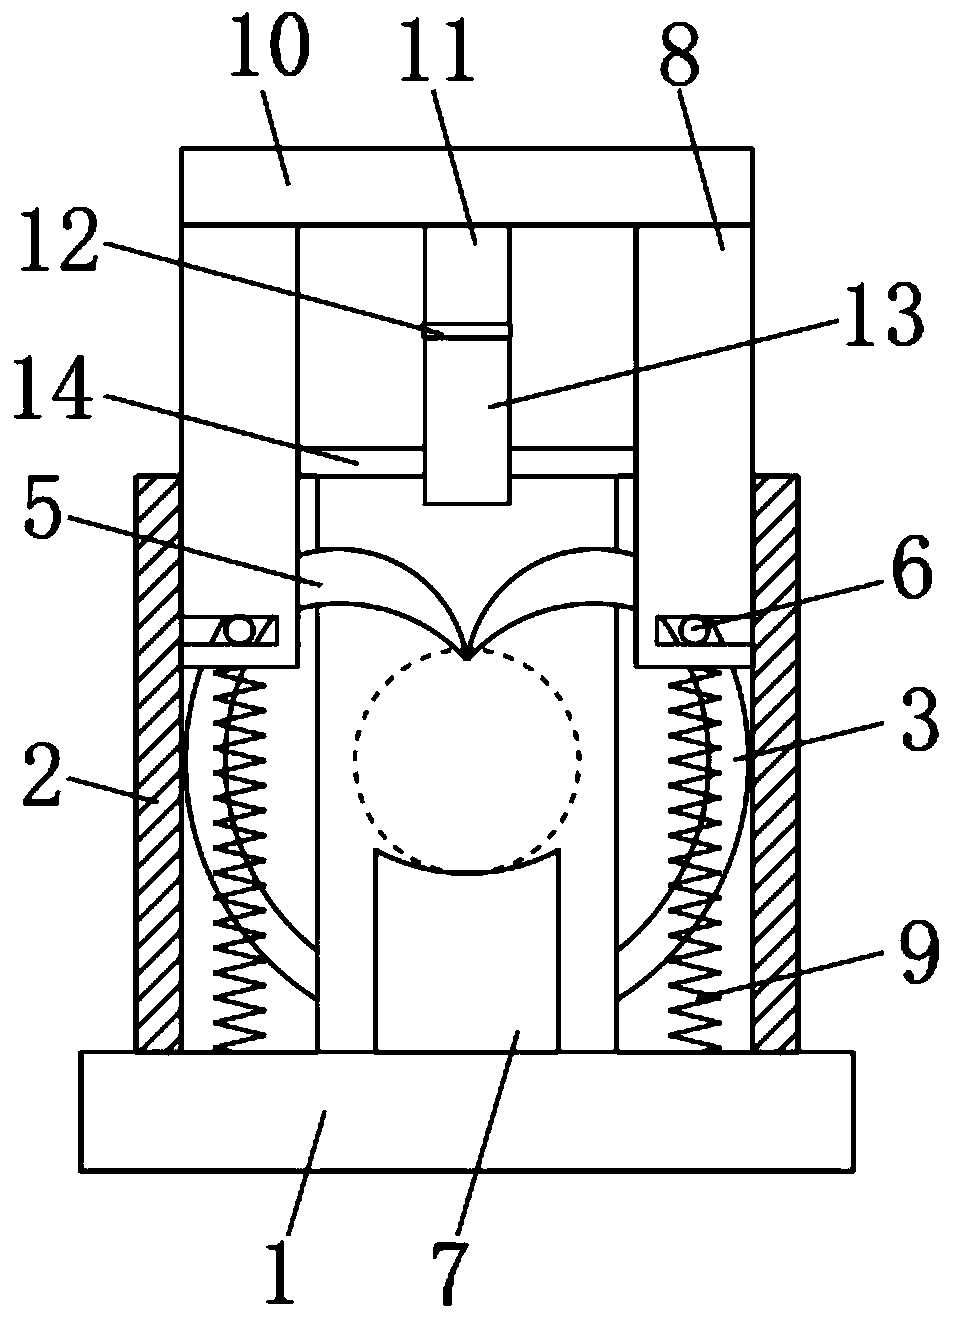 Green peel Chinese chestnut coating removal device and use method